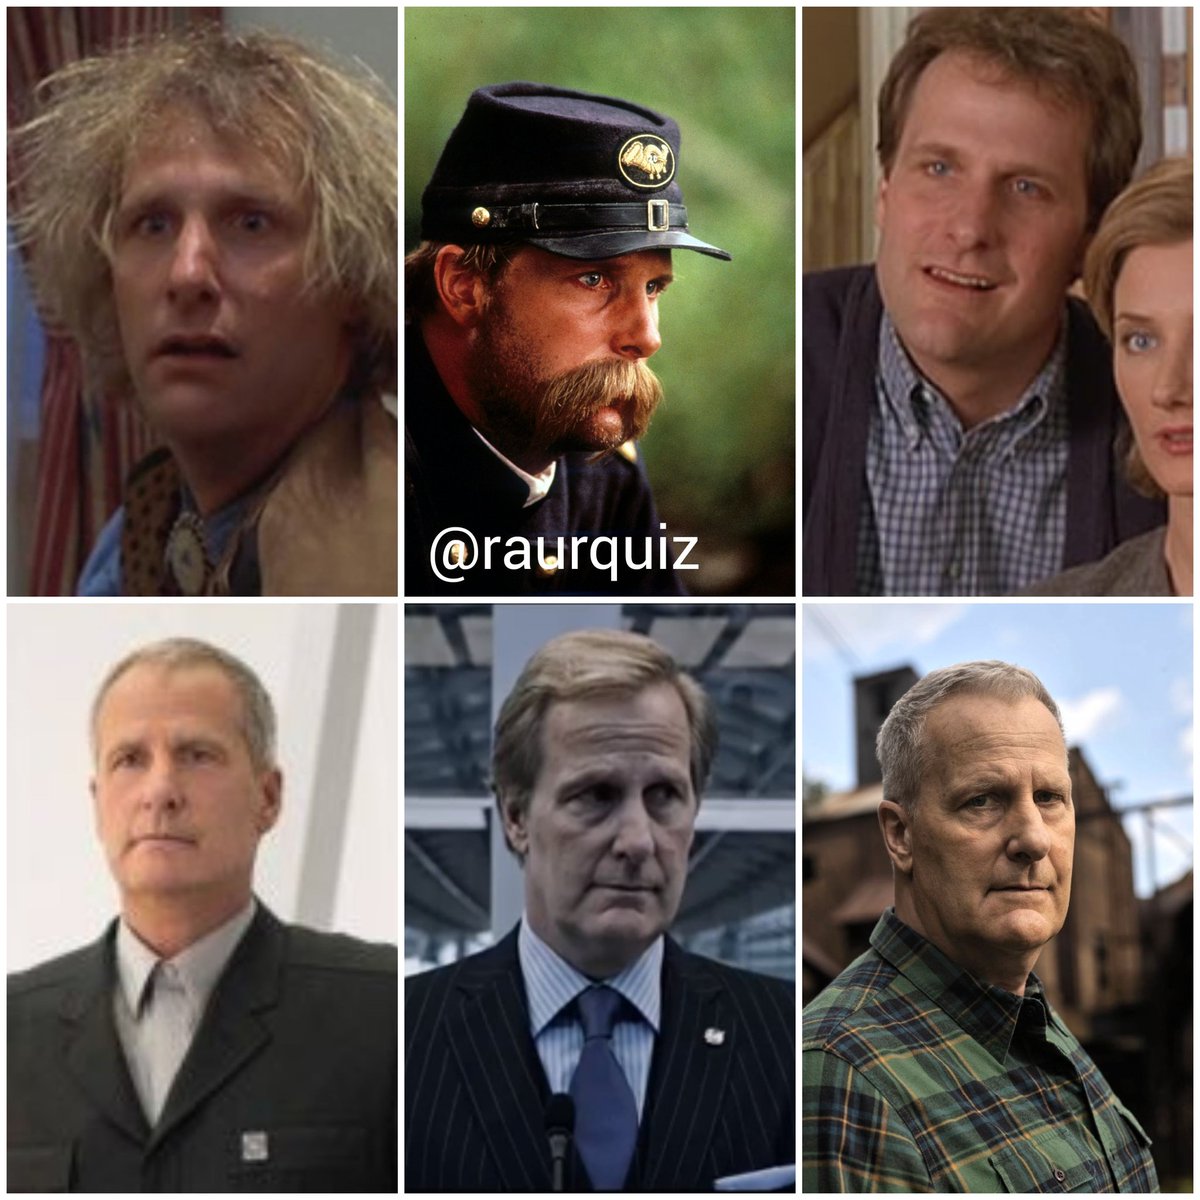 #HappyBirthday #jeffdaniels #actor #dumbanddumber #thenewsroom #godless #americanrust #arachnophobia #101dalmatians #speed #flyawayhome #allegiant #theloomingtower #gettysburg #themartian #thecomeyrule #somethingwild #thecrossing #looper #paperman #thelookout #timescape